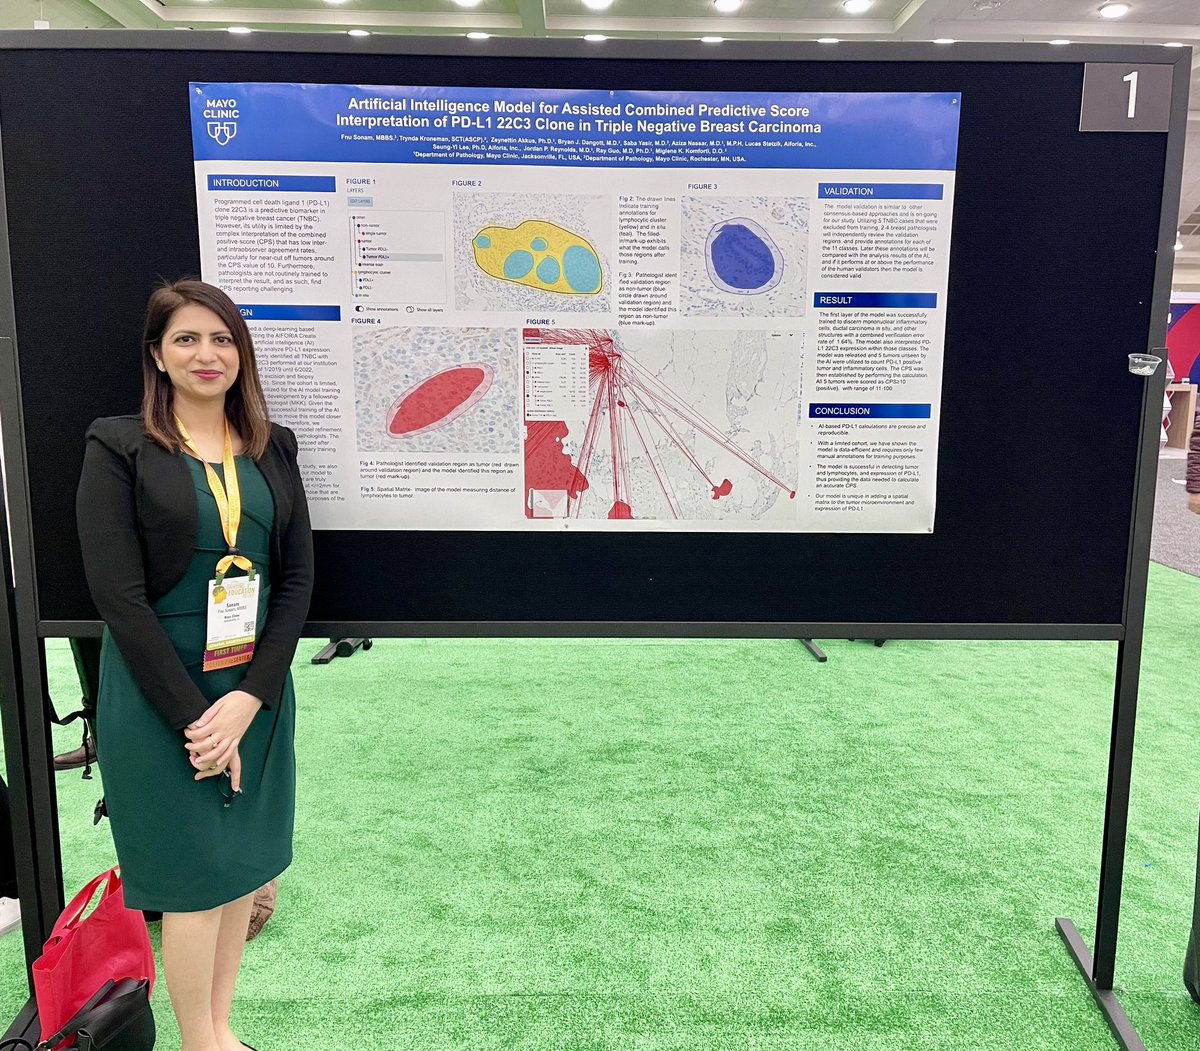 Stop by poster #1 to learn about our AI module for analyzing PD-L1 expression in triple-negative carcinoma
#USCAP #USCAP2024 #posterpresentation #firsttime #mayoclinic #pathtwitter #pathologyX #match2025 #pathtomatch #aapiringpathologist